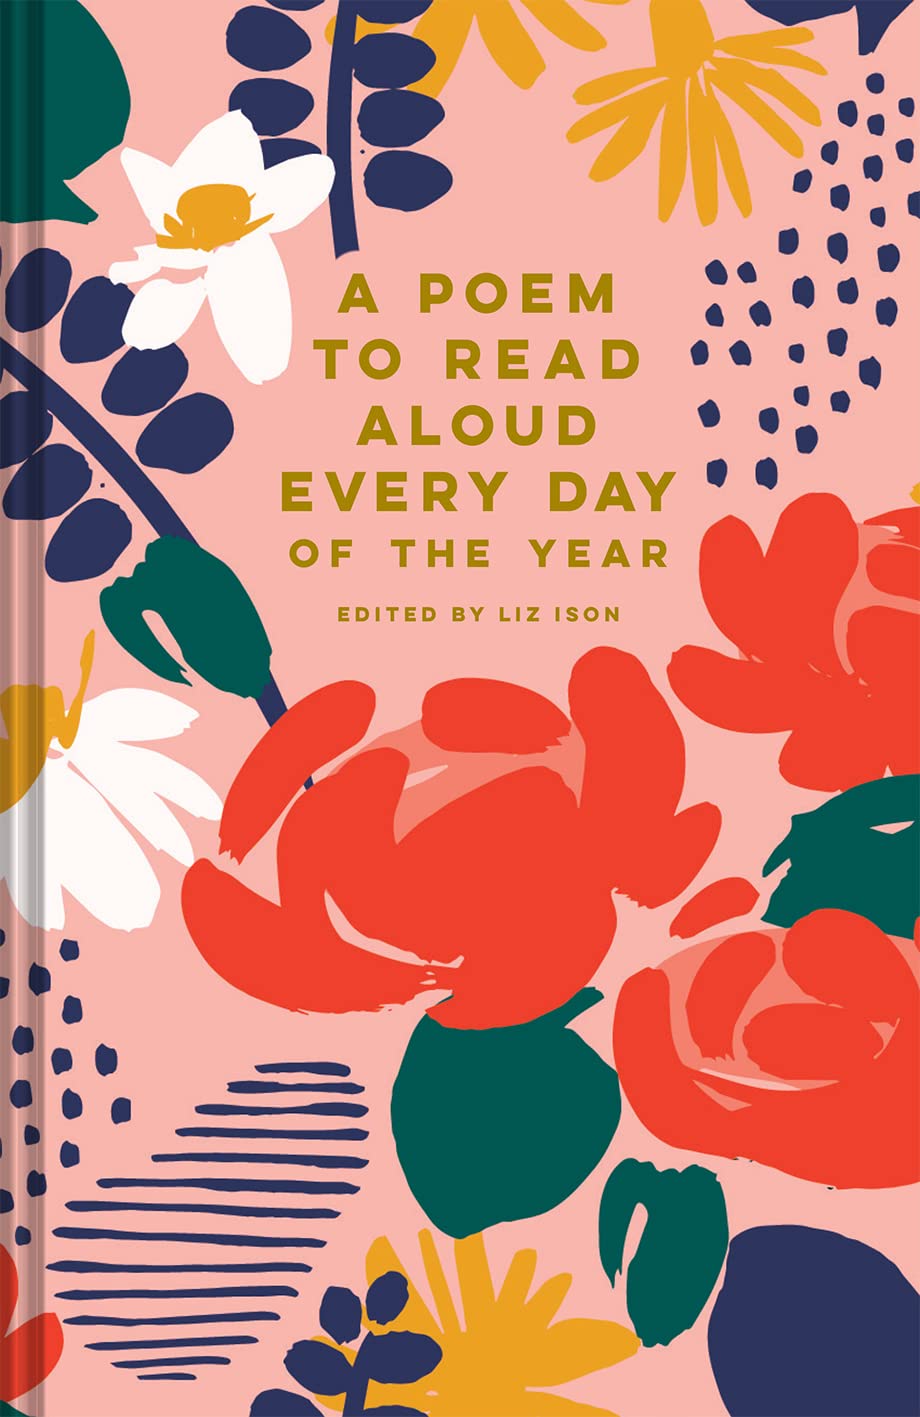 A Poem to Read Aloud Every Day of the Year: Liz Ison (Batsford Poetry Anthologies)